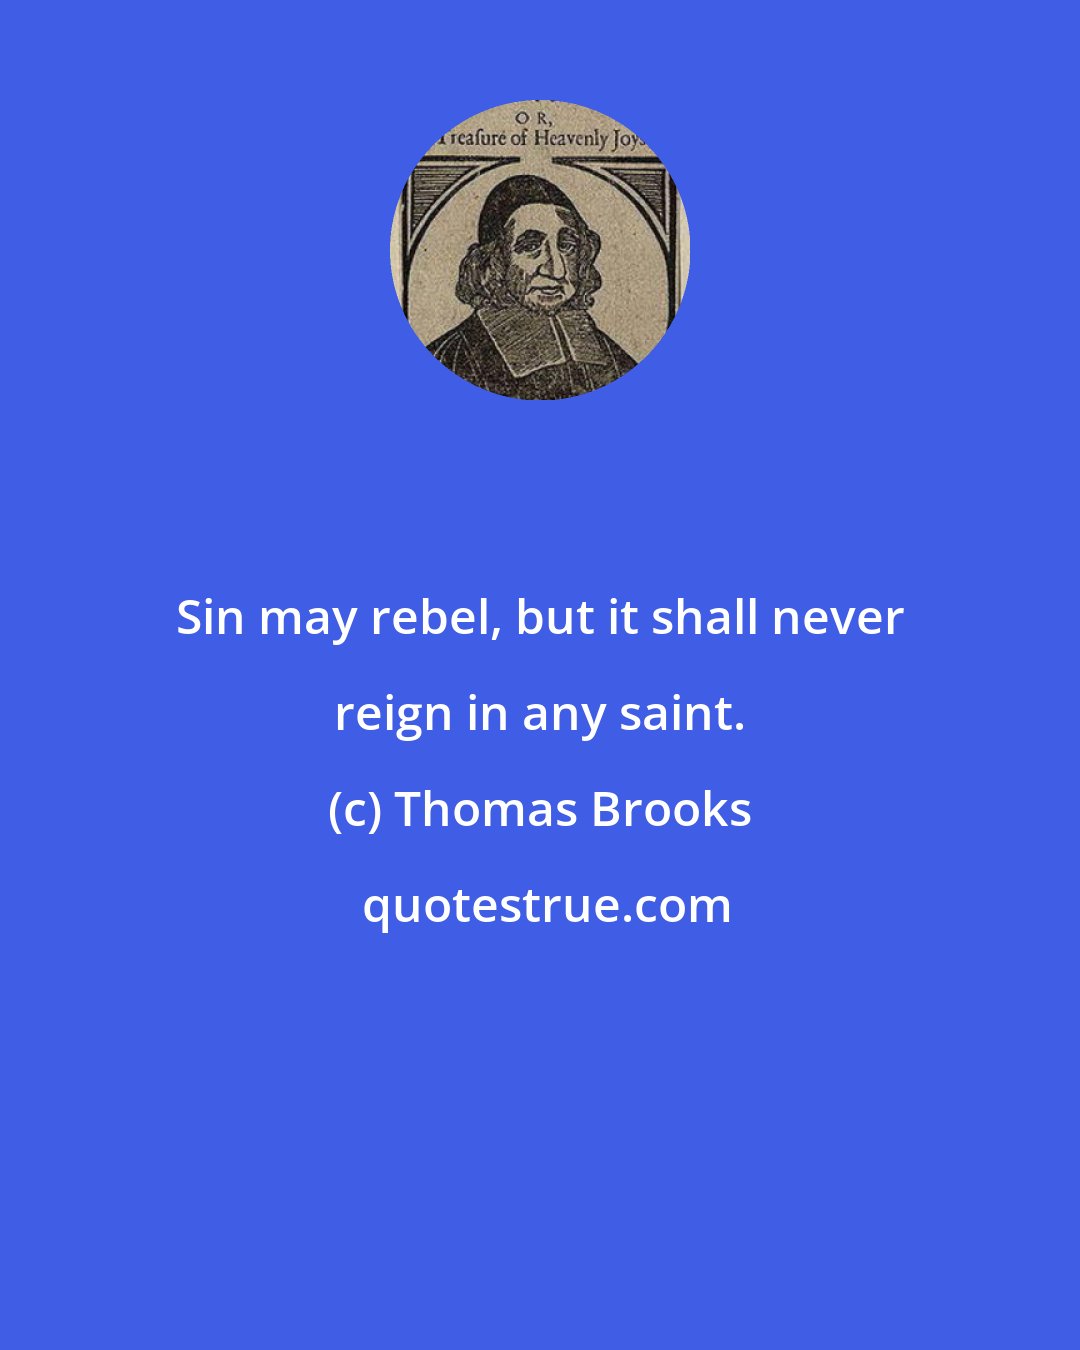 Thomas Brooks: Sin may rebel, but it shall never reign in any saint.